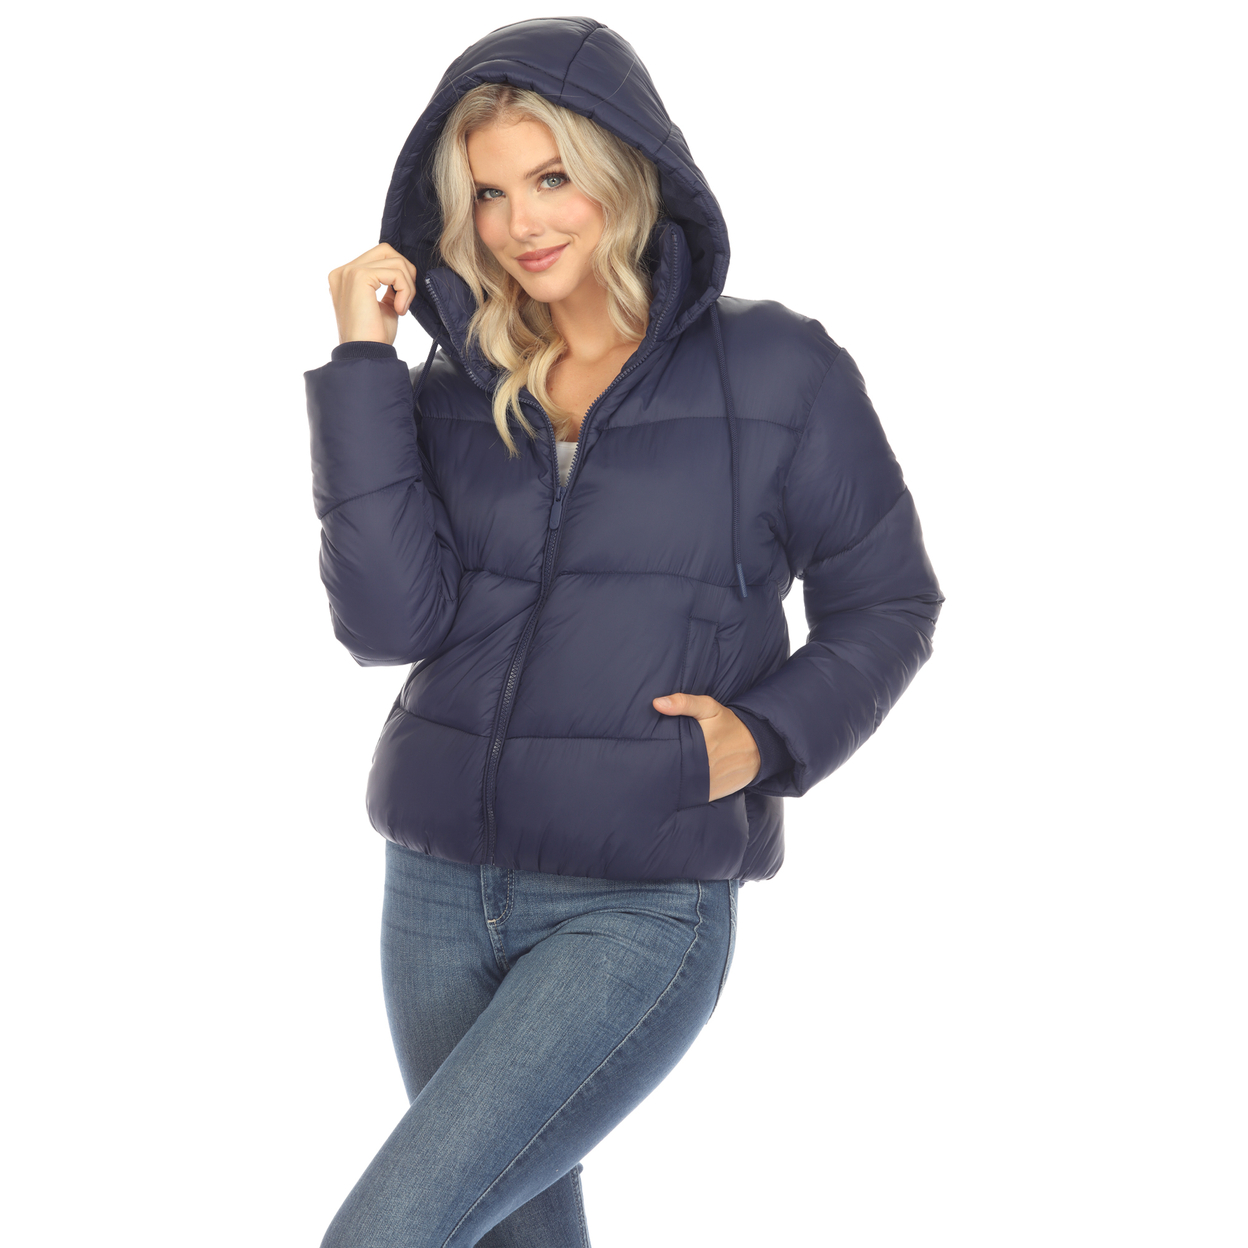 White Mark Women's Zip Hooded Puffer Jacket With Pockets - Black, 2x